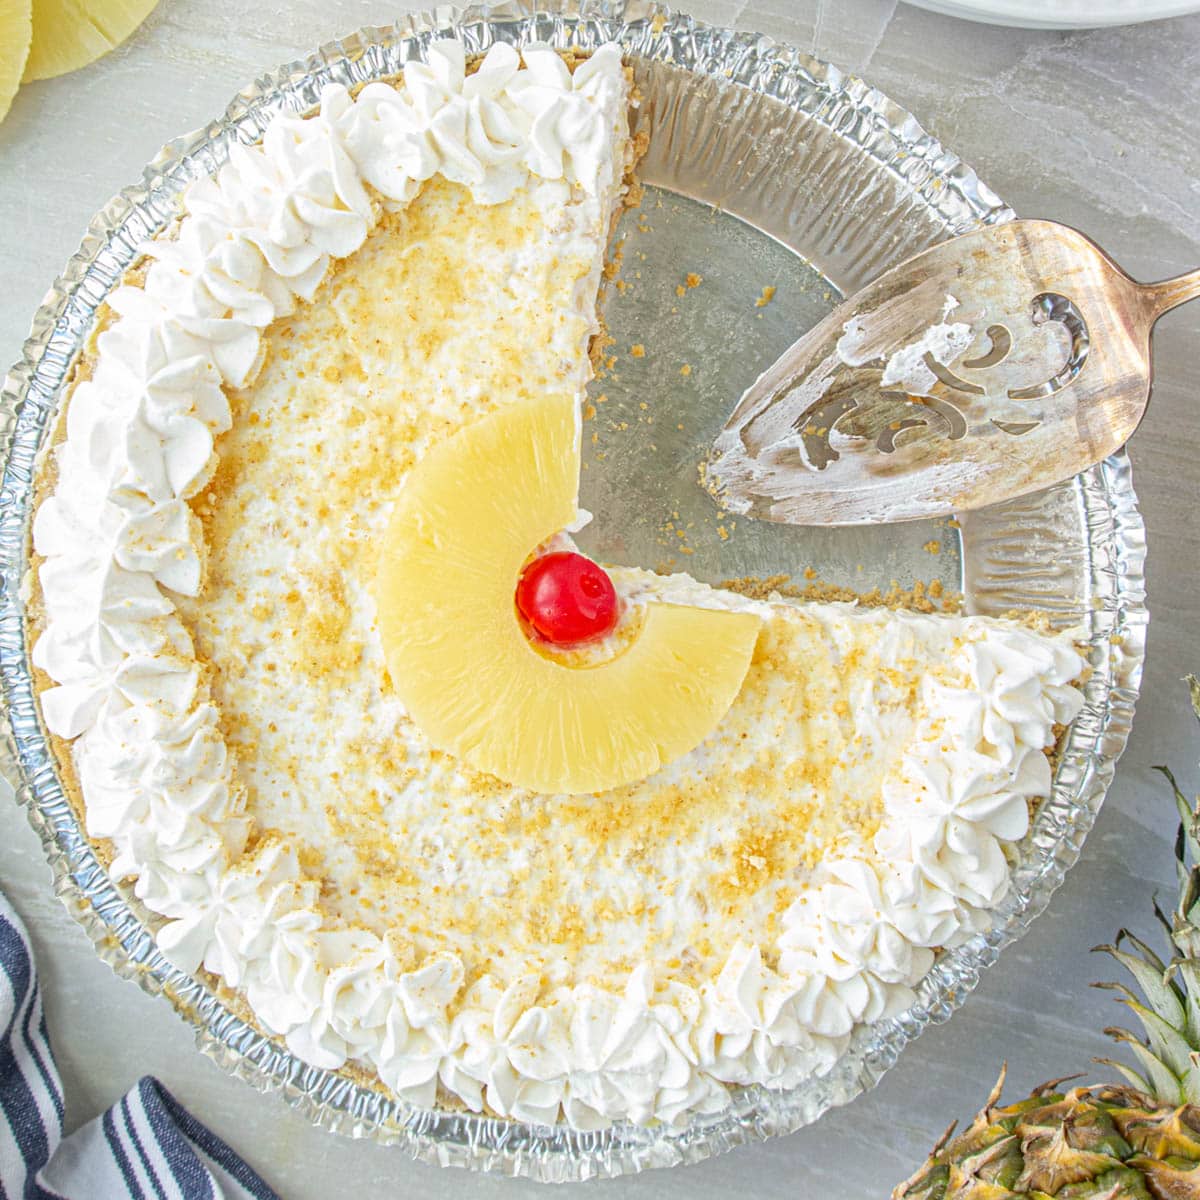 Overhead shot of No-Bake Pineapple Cream Cheese Pie with a serving spatula ready to dish up another slice.